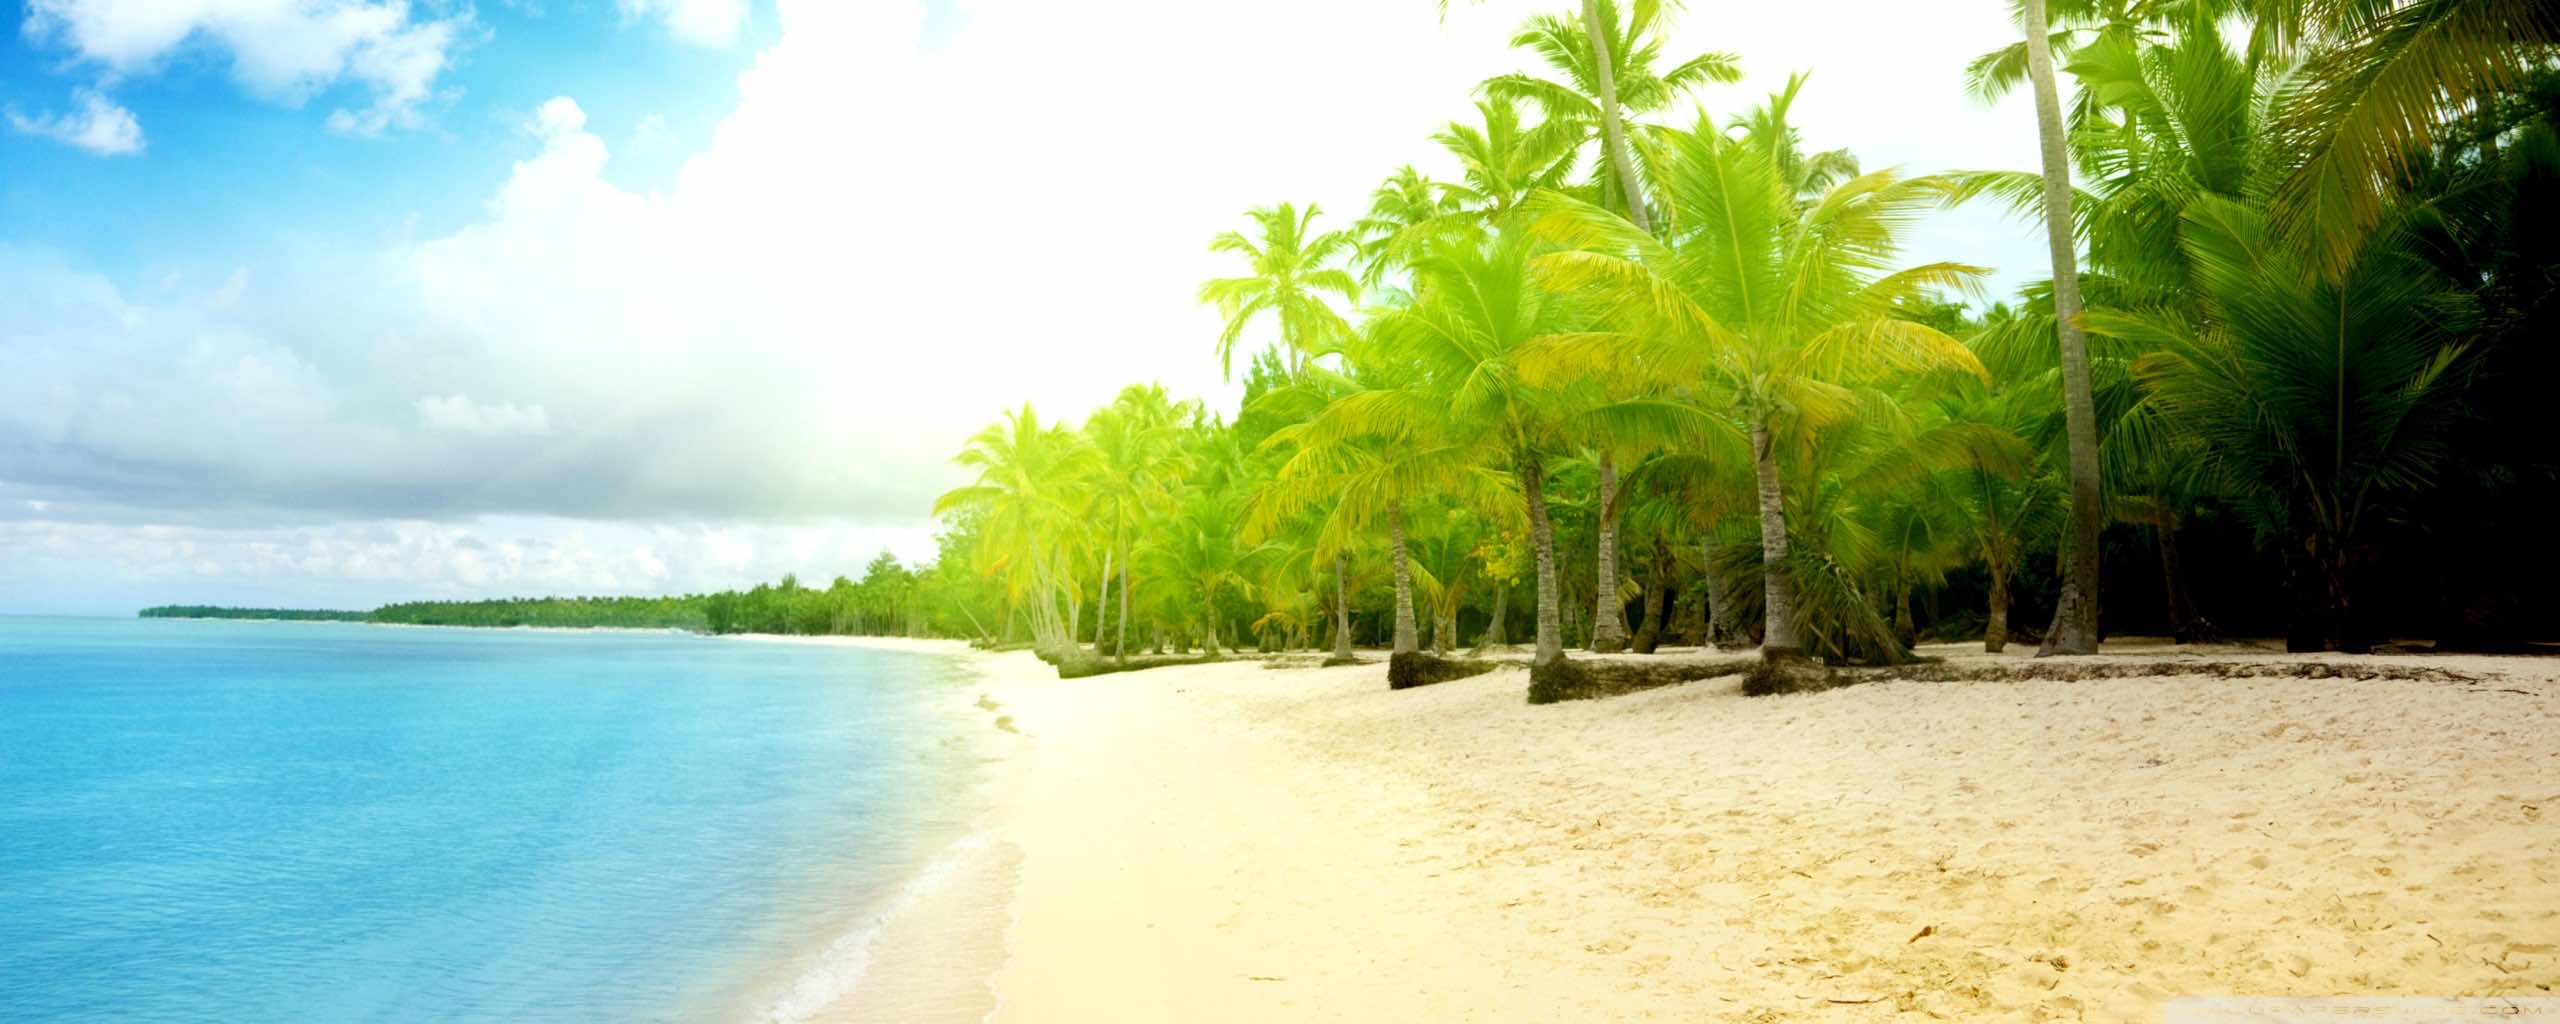 45 Beach Wallpaper For Mobile And Desktop In Full HD For Download